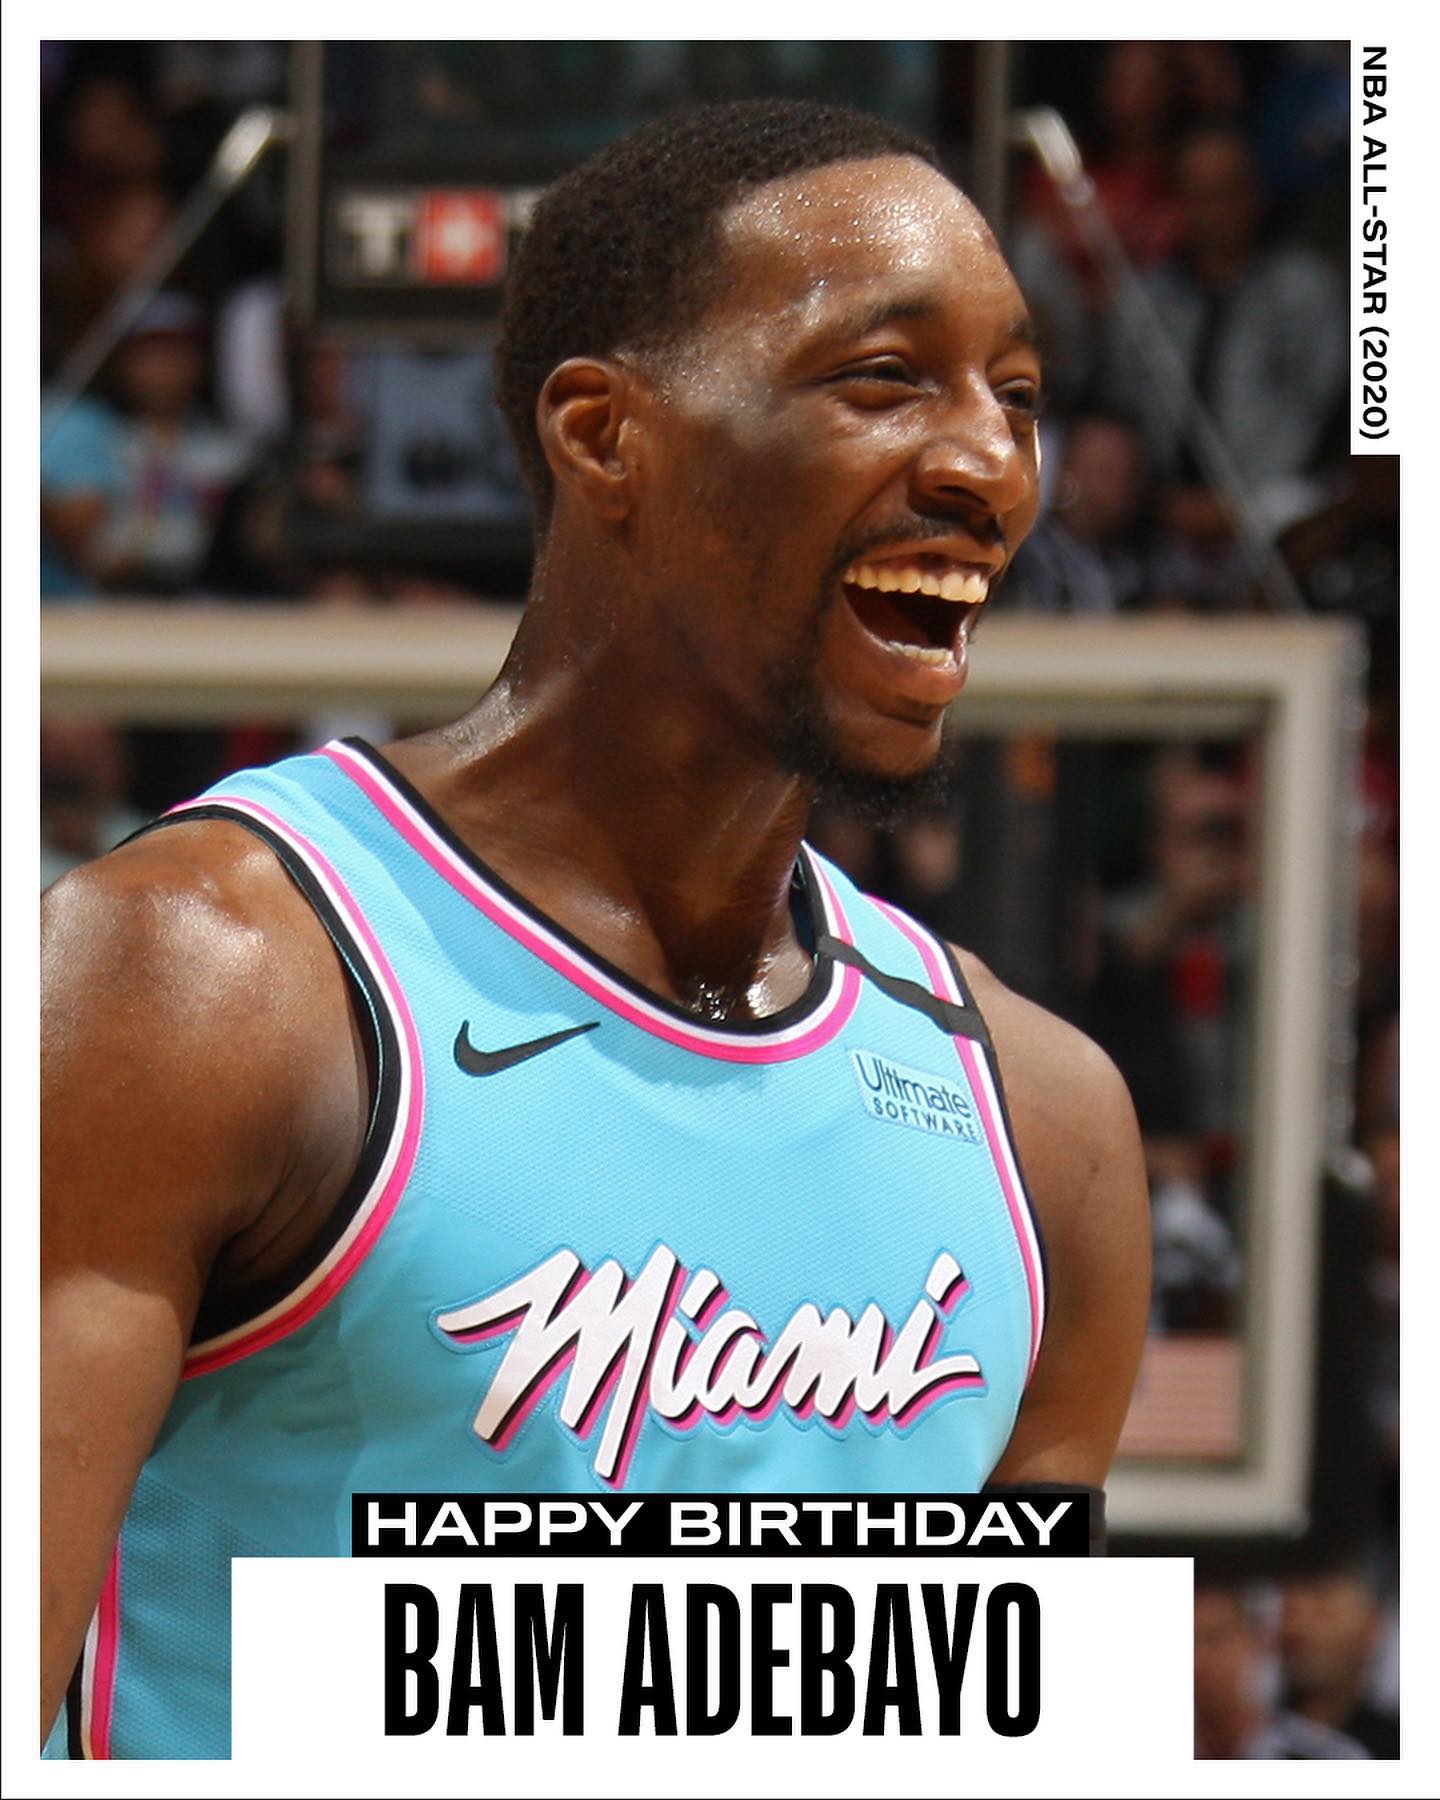 Join us in wishing @bam1of1 of the @miamiheat a HAPPY 25th BIRTHDAY! #NBABDAY...